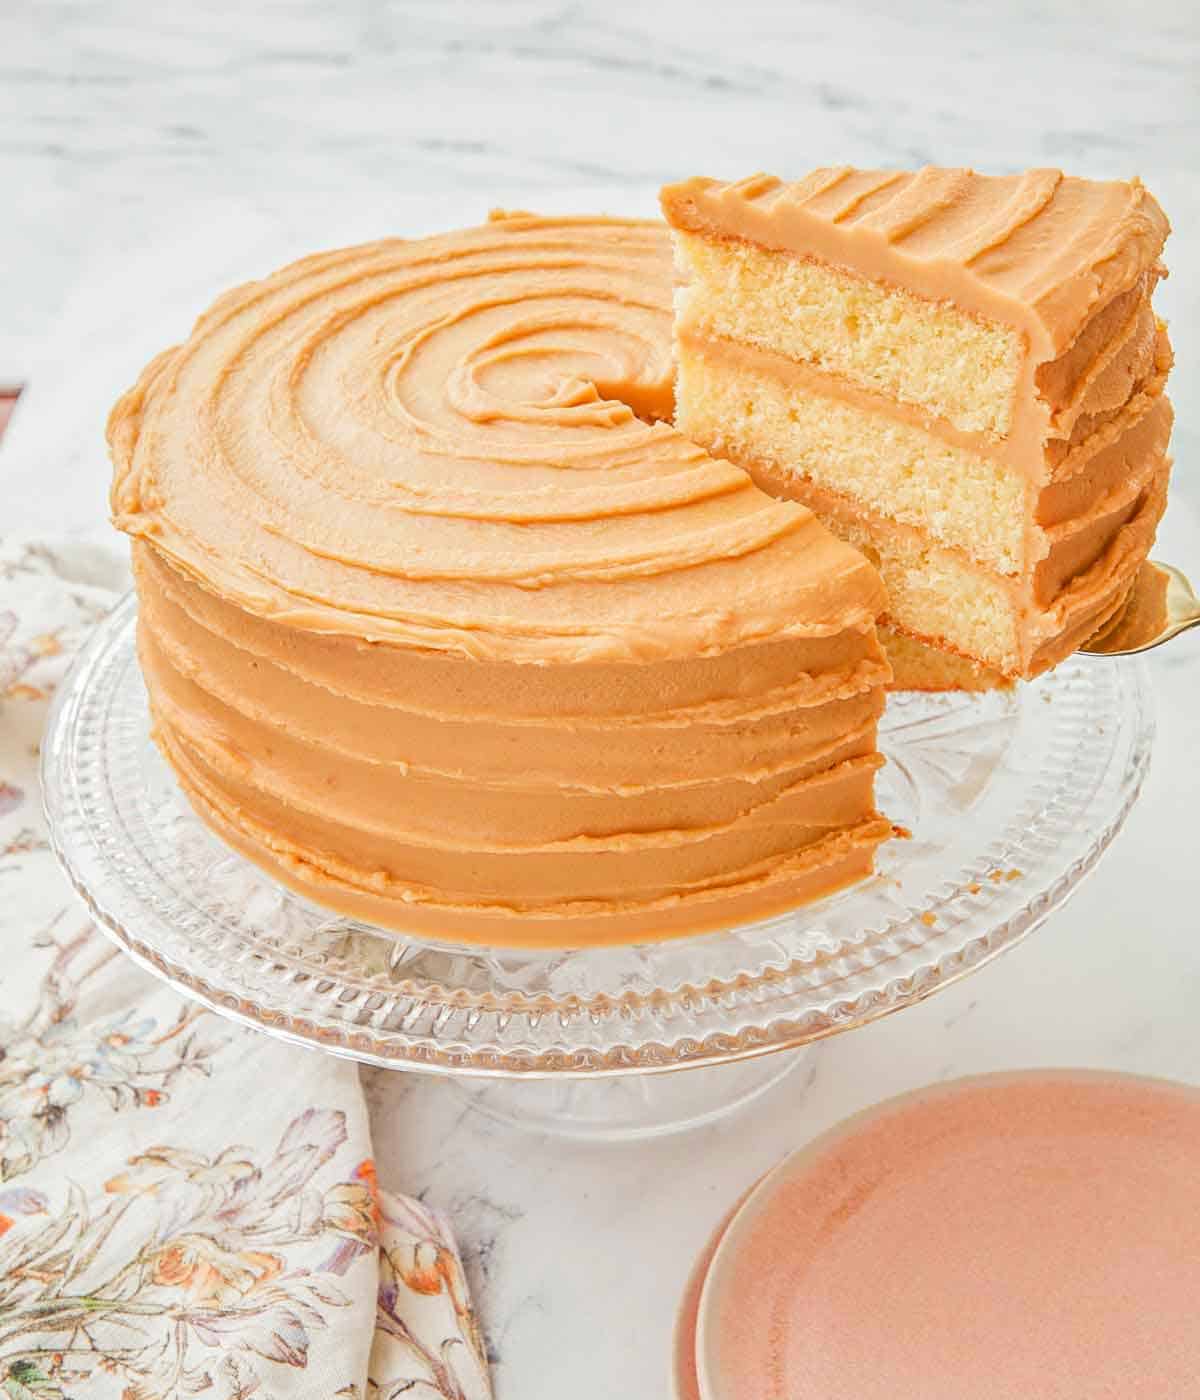 A slice of caramel cake sliced and lifted from the cake on a cake stand.